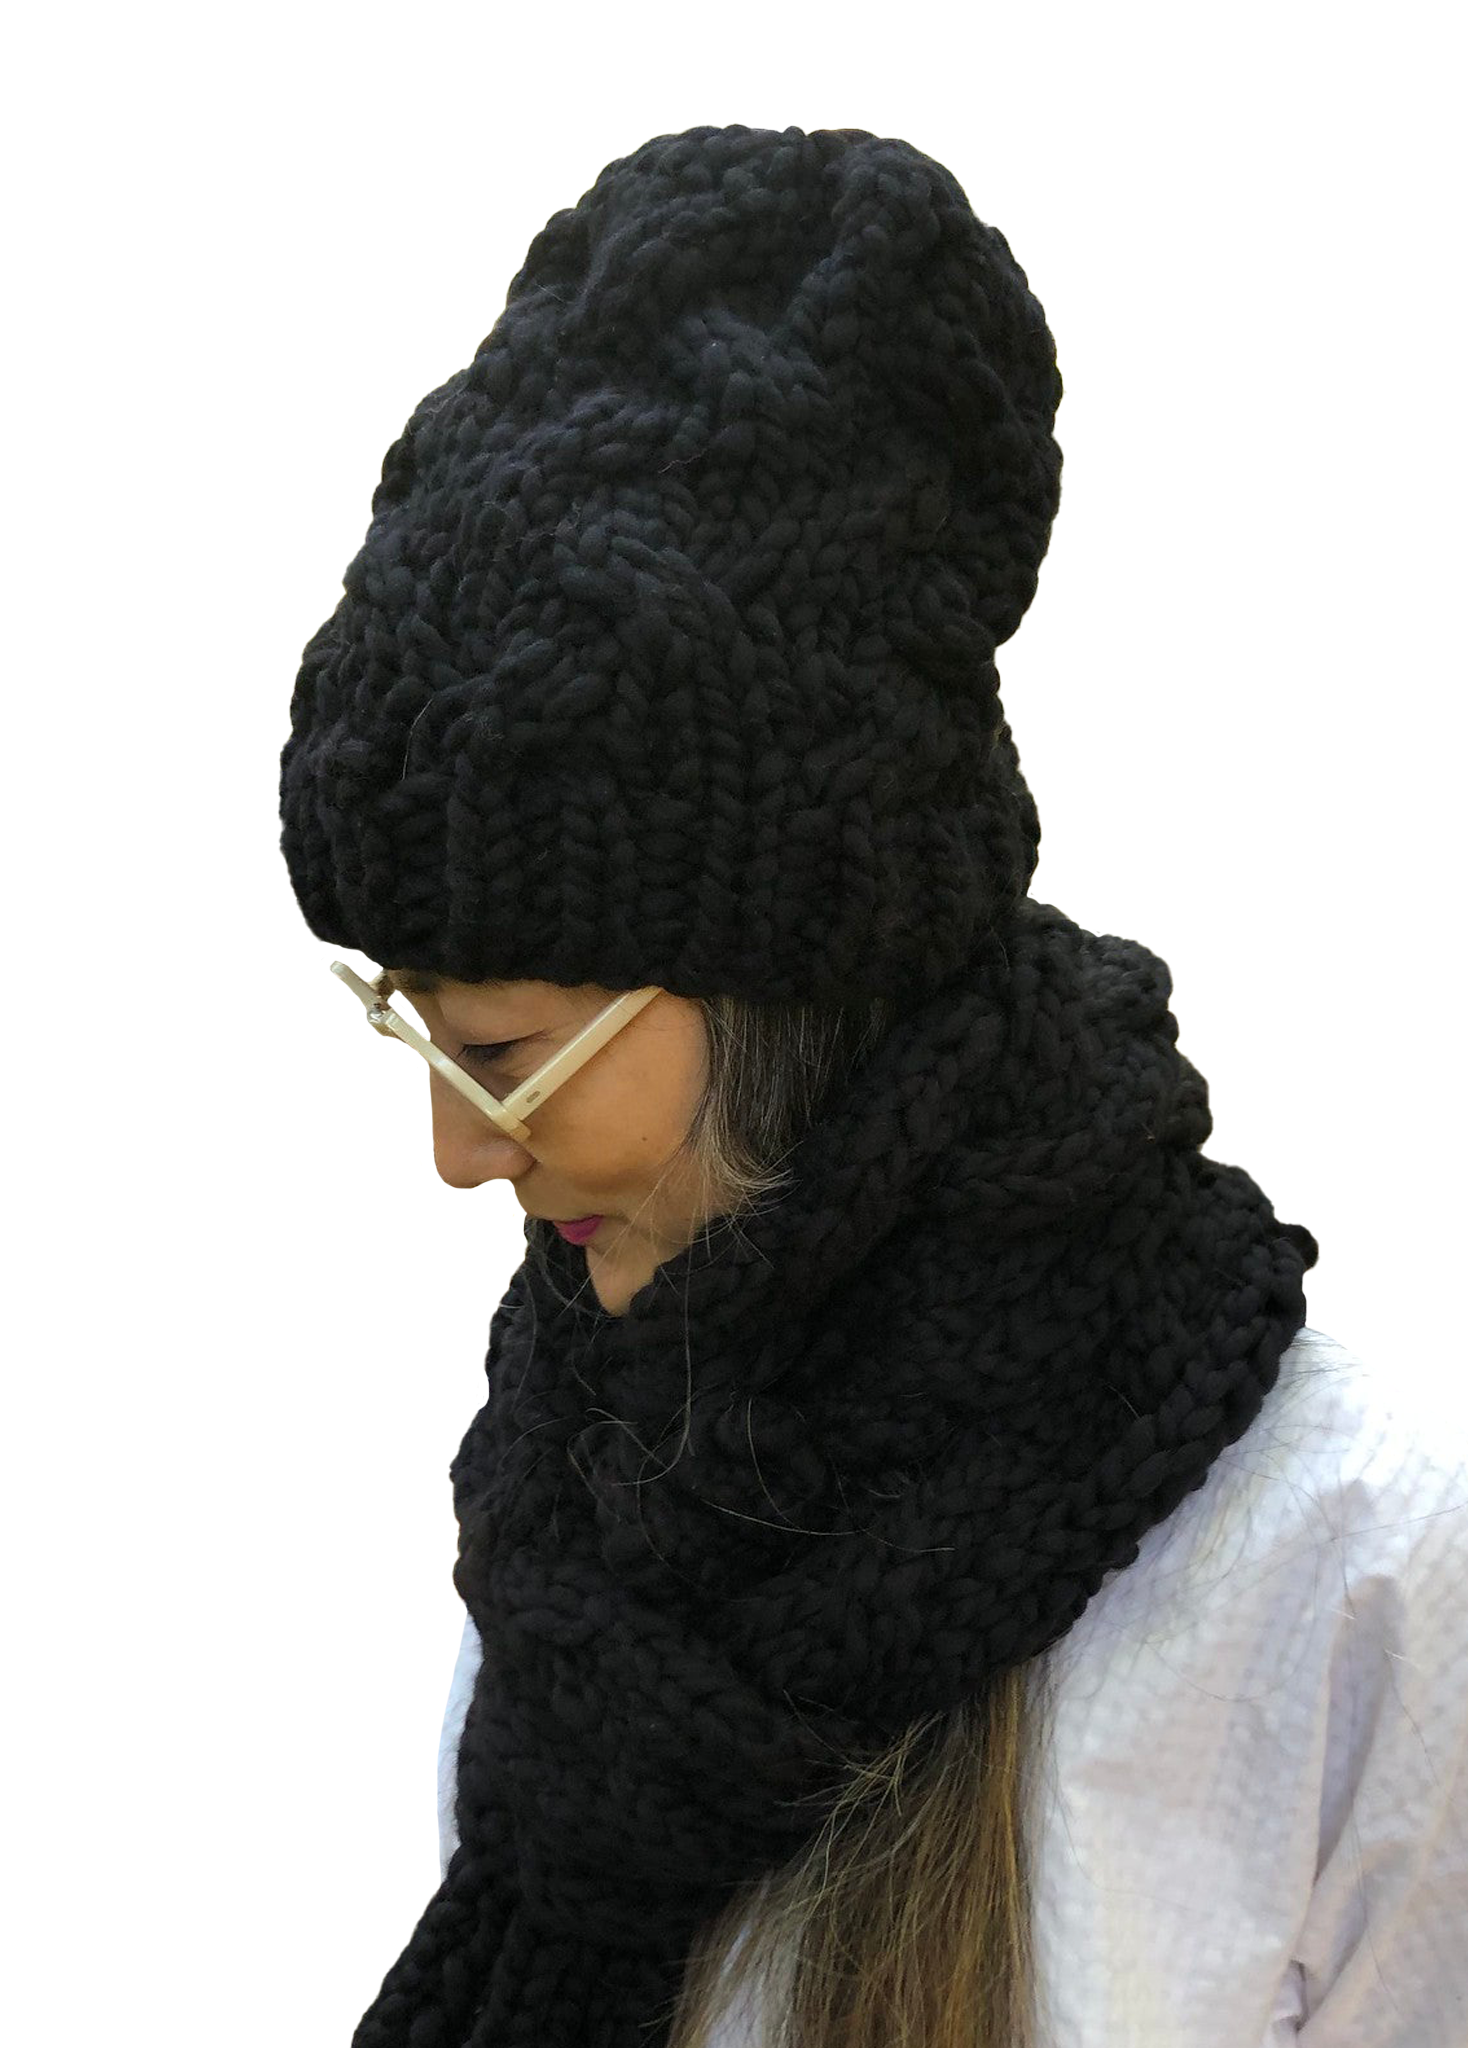 READY TO SHIP SALE! - Cable Hat - Merino